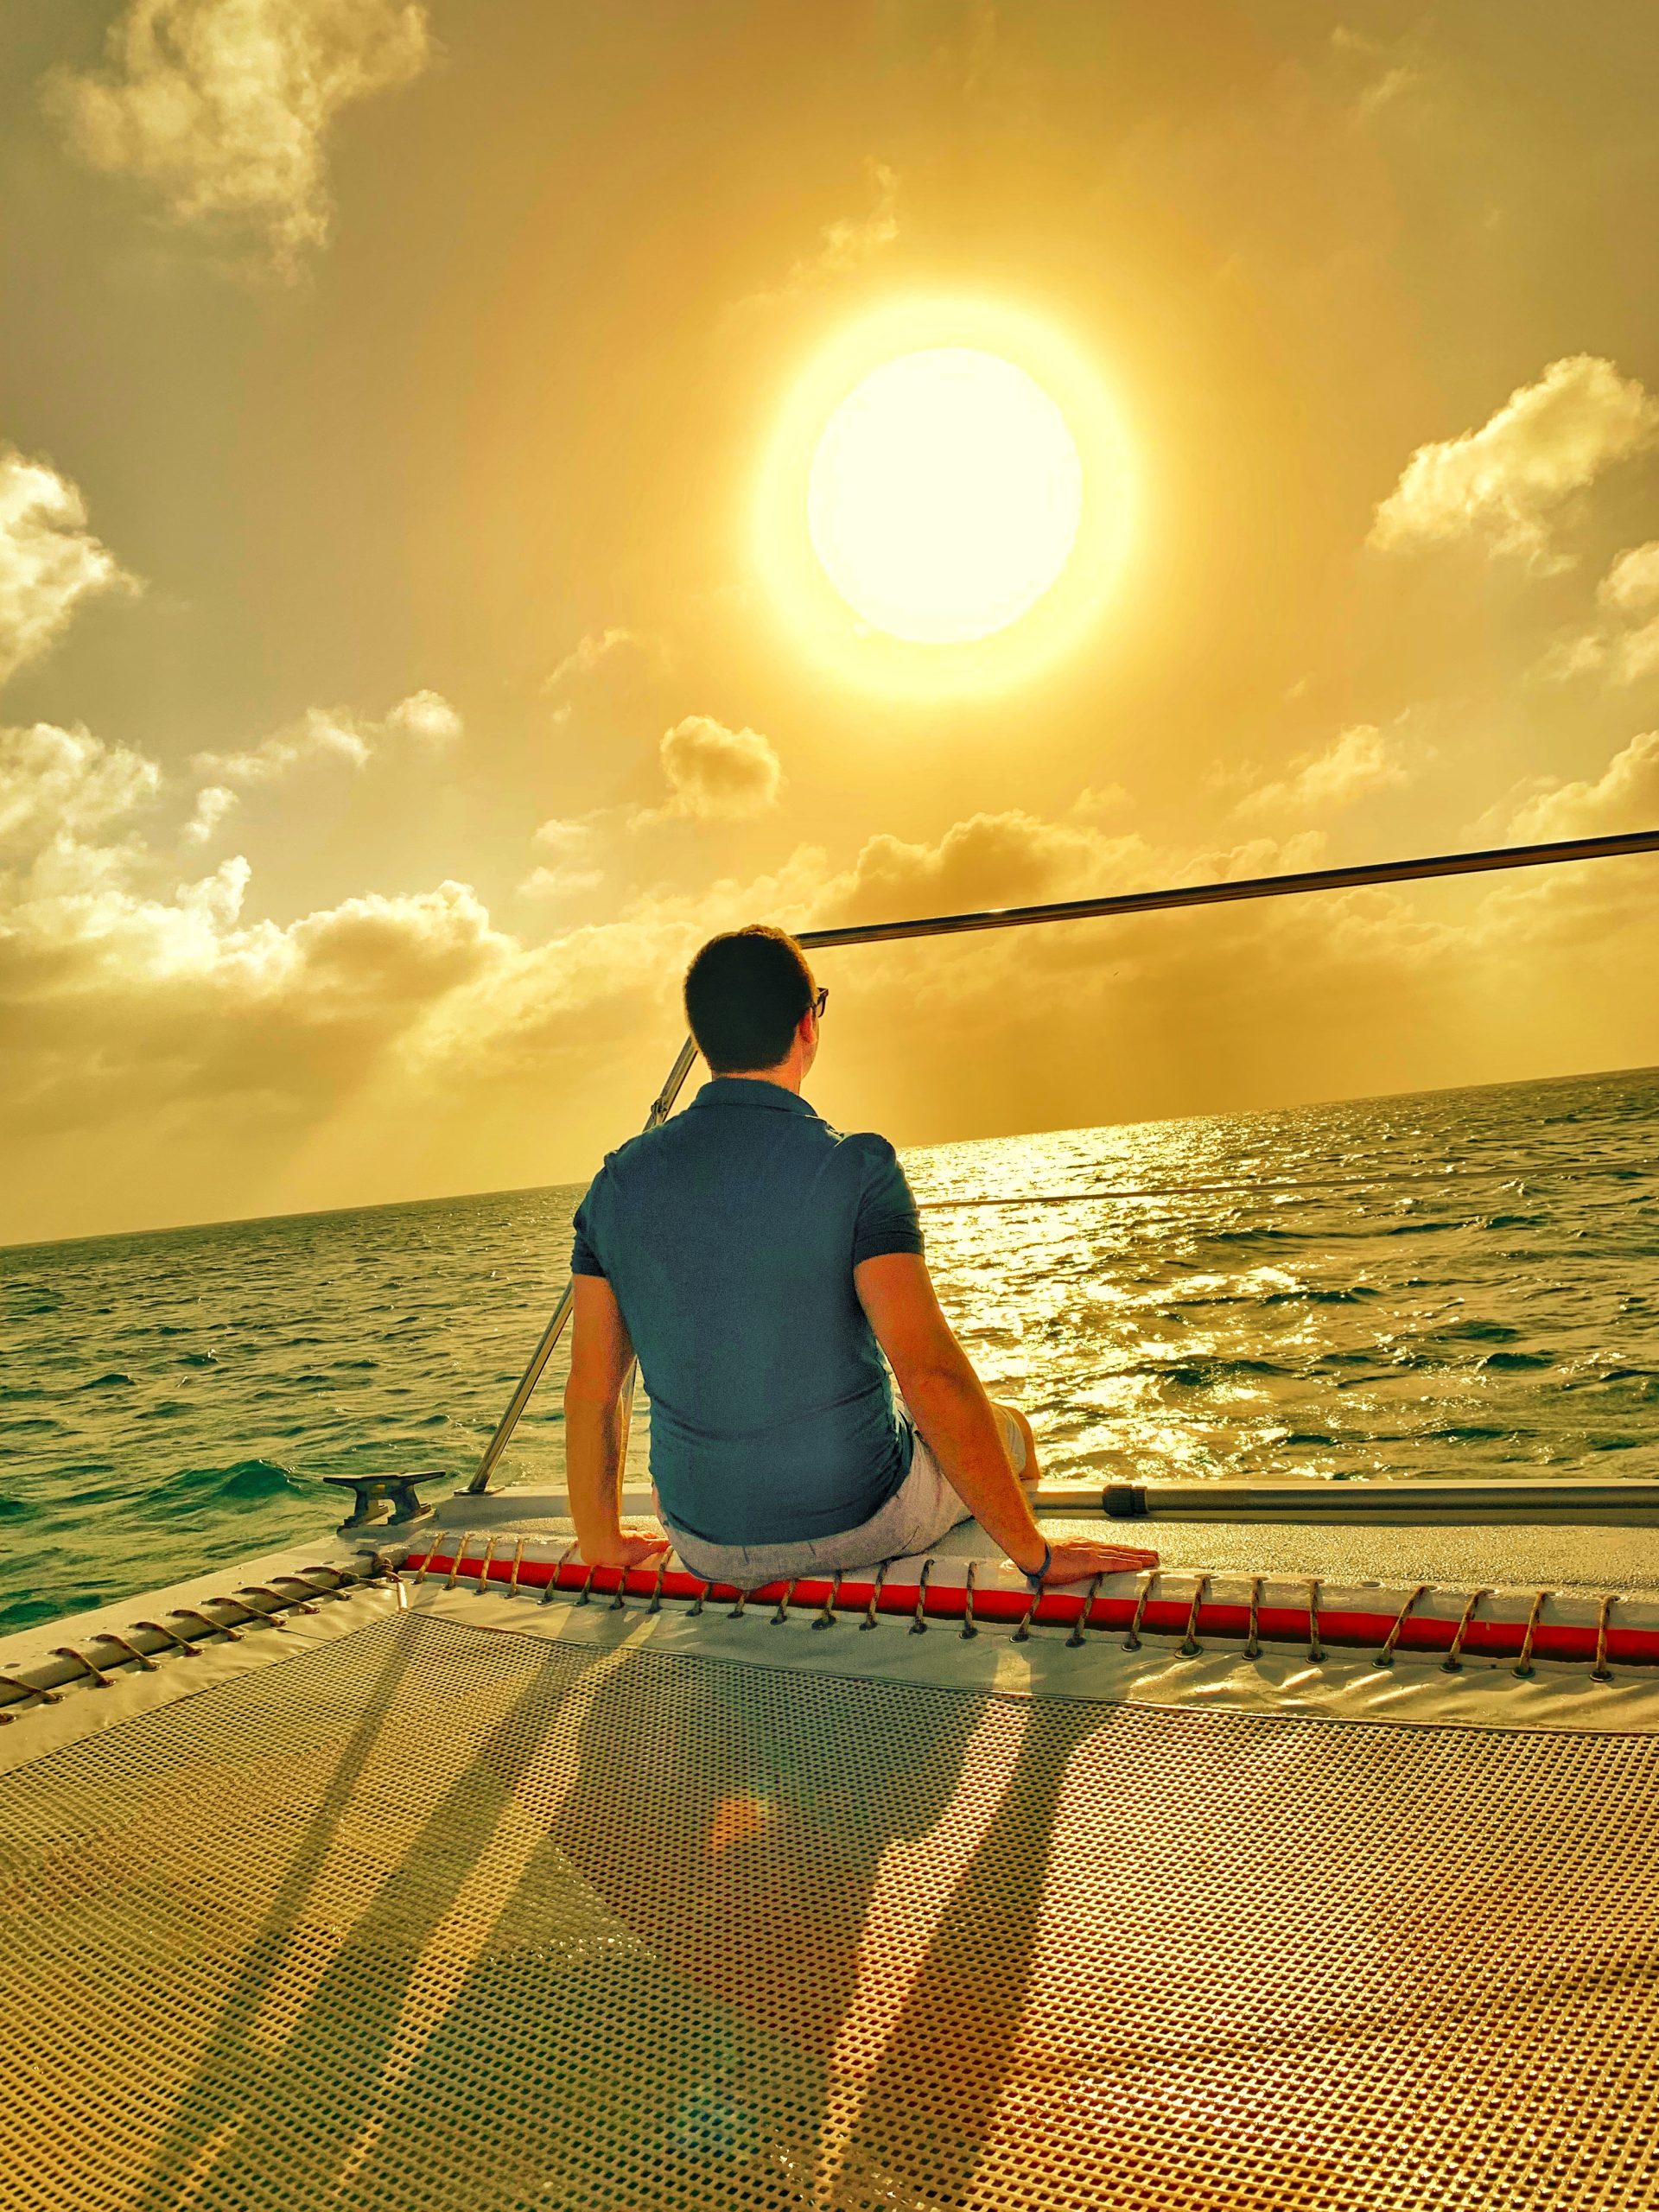 Man sitting on the edge of a boat staring into the sun and ocean